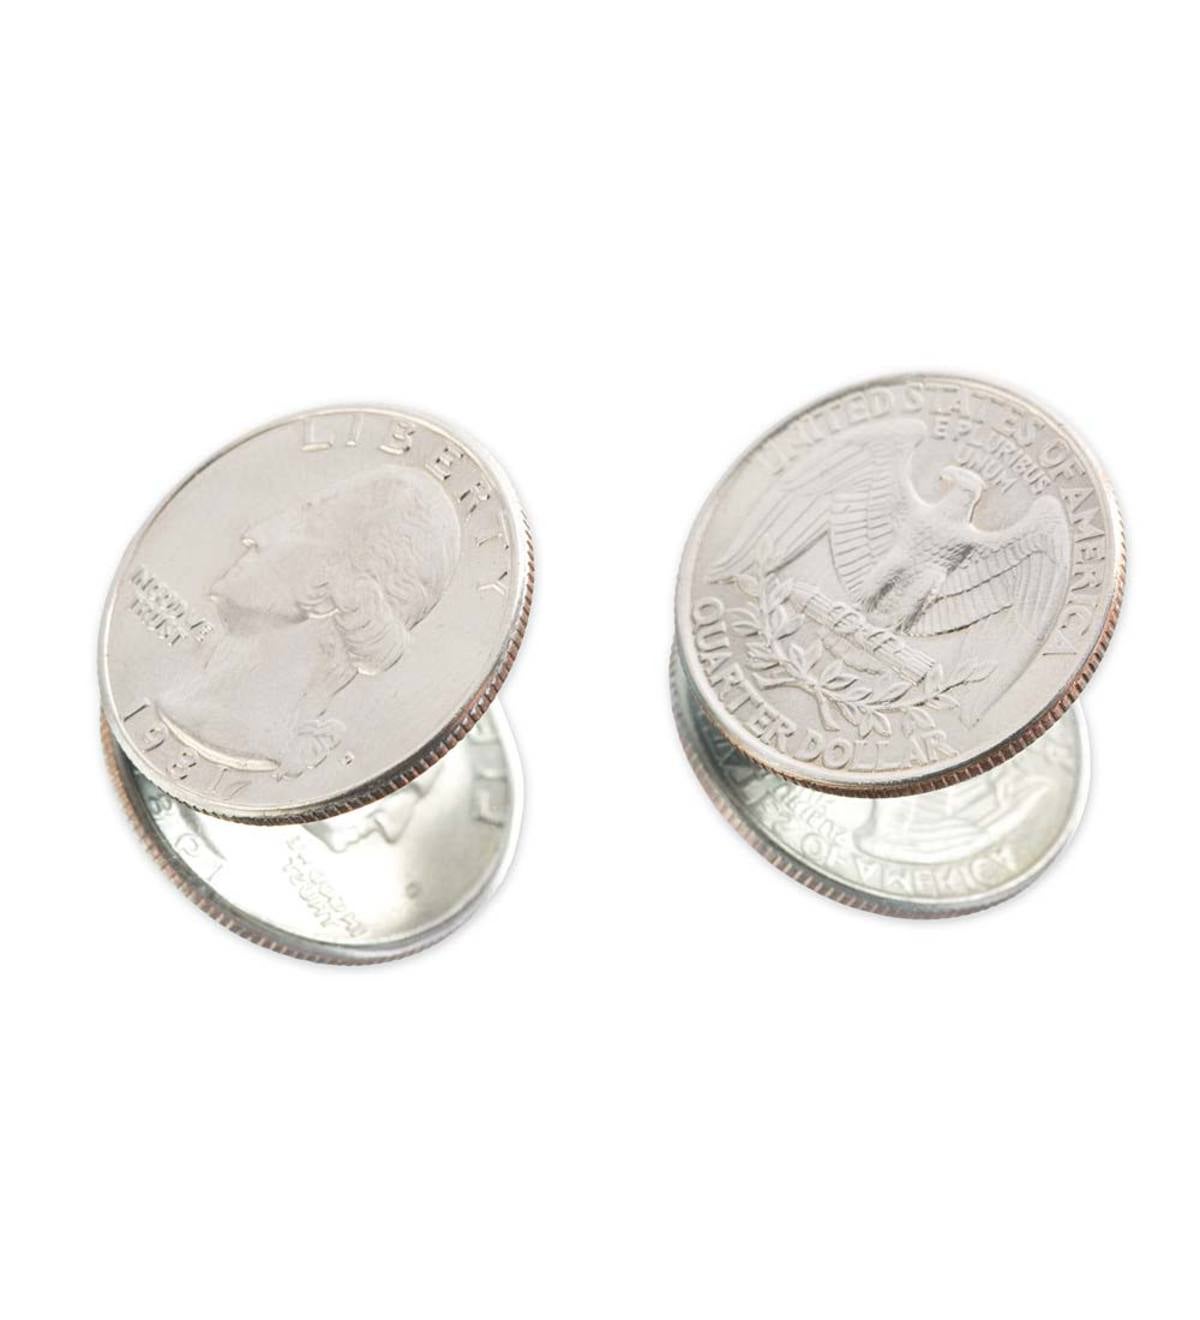 Two-Head, Two-Tail Quarter Set